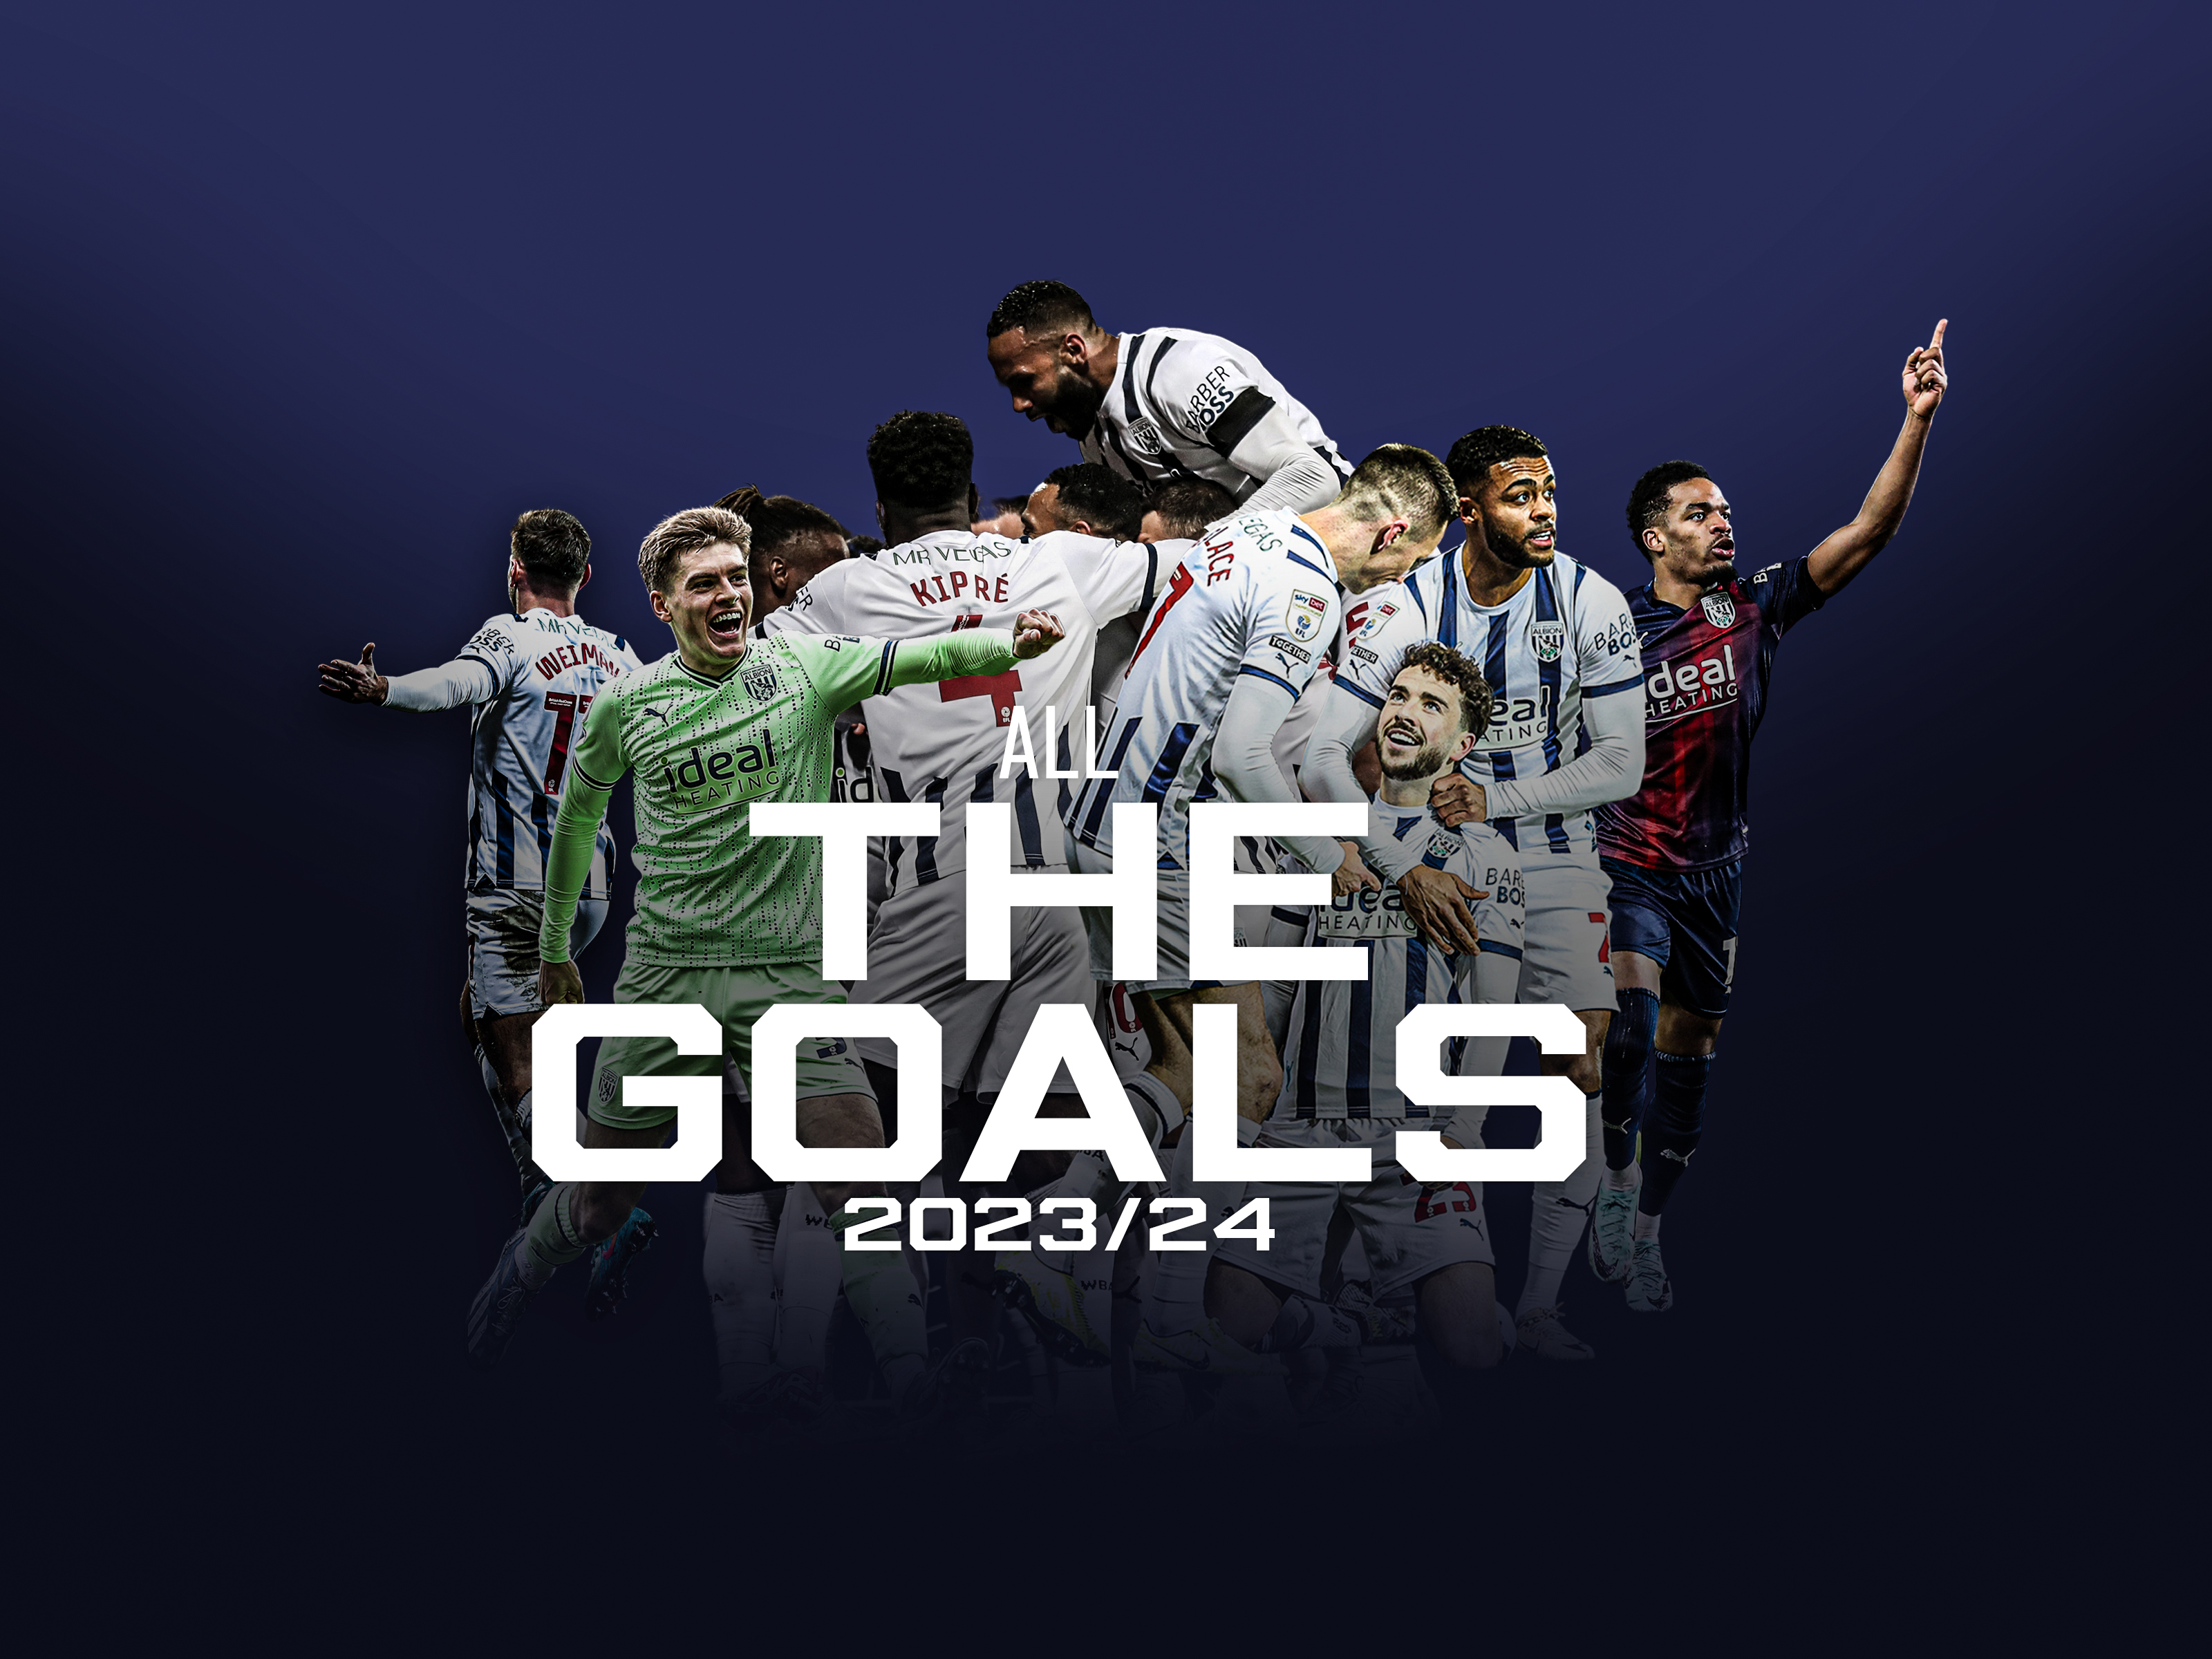 All the goals graphic for 2023/24 with a collage of players celebrating on in all three kits